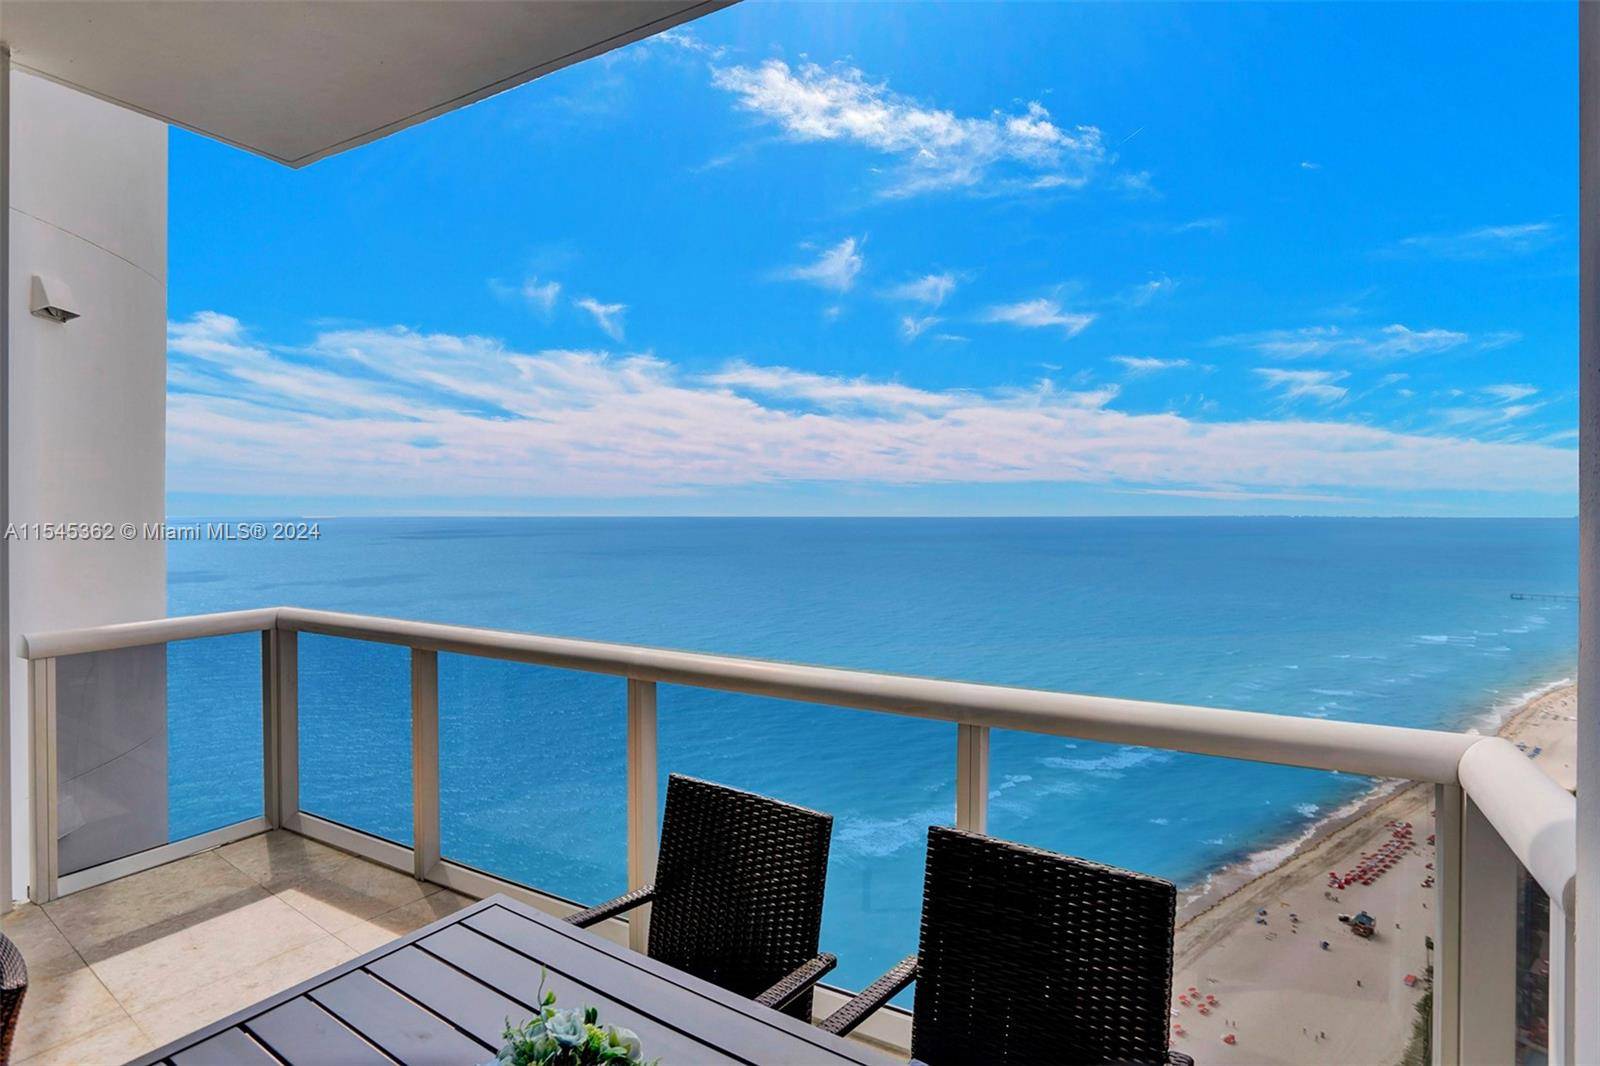 LUXUROIUS OCEANFRONT TRUMP PALACE LOWER PENTHOUSE WITH UNOBSTRUCTED SE OCEAN VIEW MAGNIFICENT UNIT IN THE MOST DESIRABLE BUILDING ON SUNNY ISLES BEACH UPGRADED WITH MARBLE FLOORS THROUGHT, HI TECH EUROPEAN ...